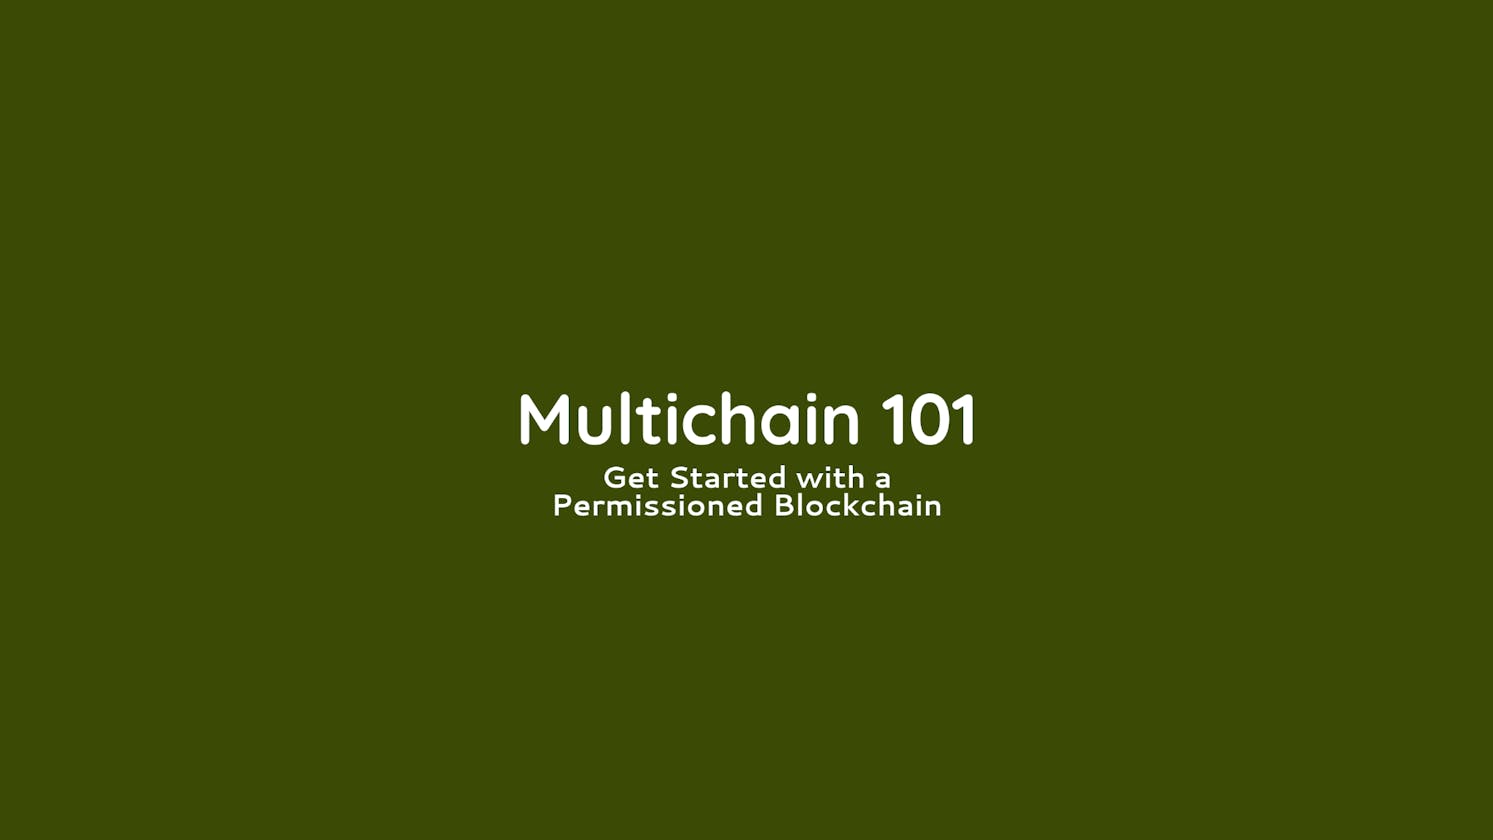 Create your first permission blockchain with Multichain